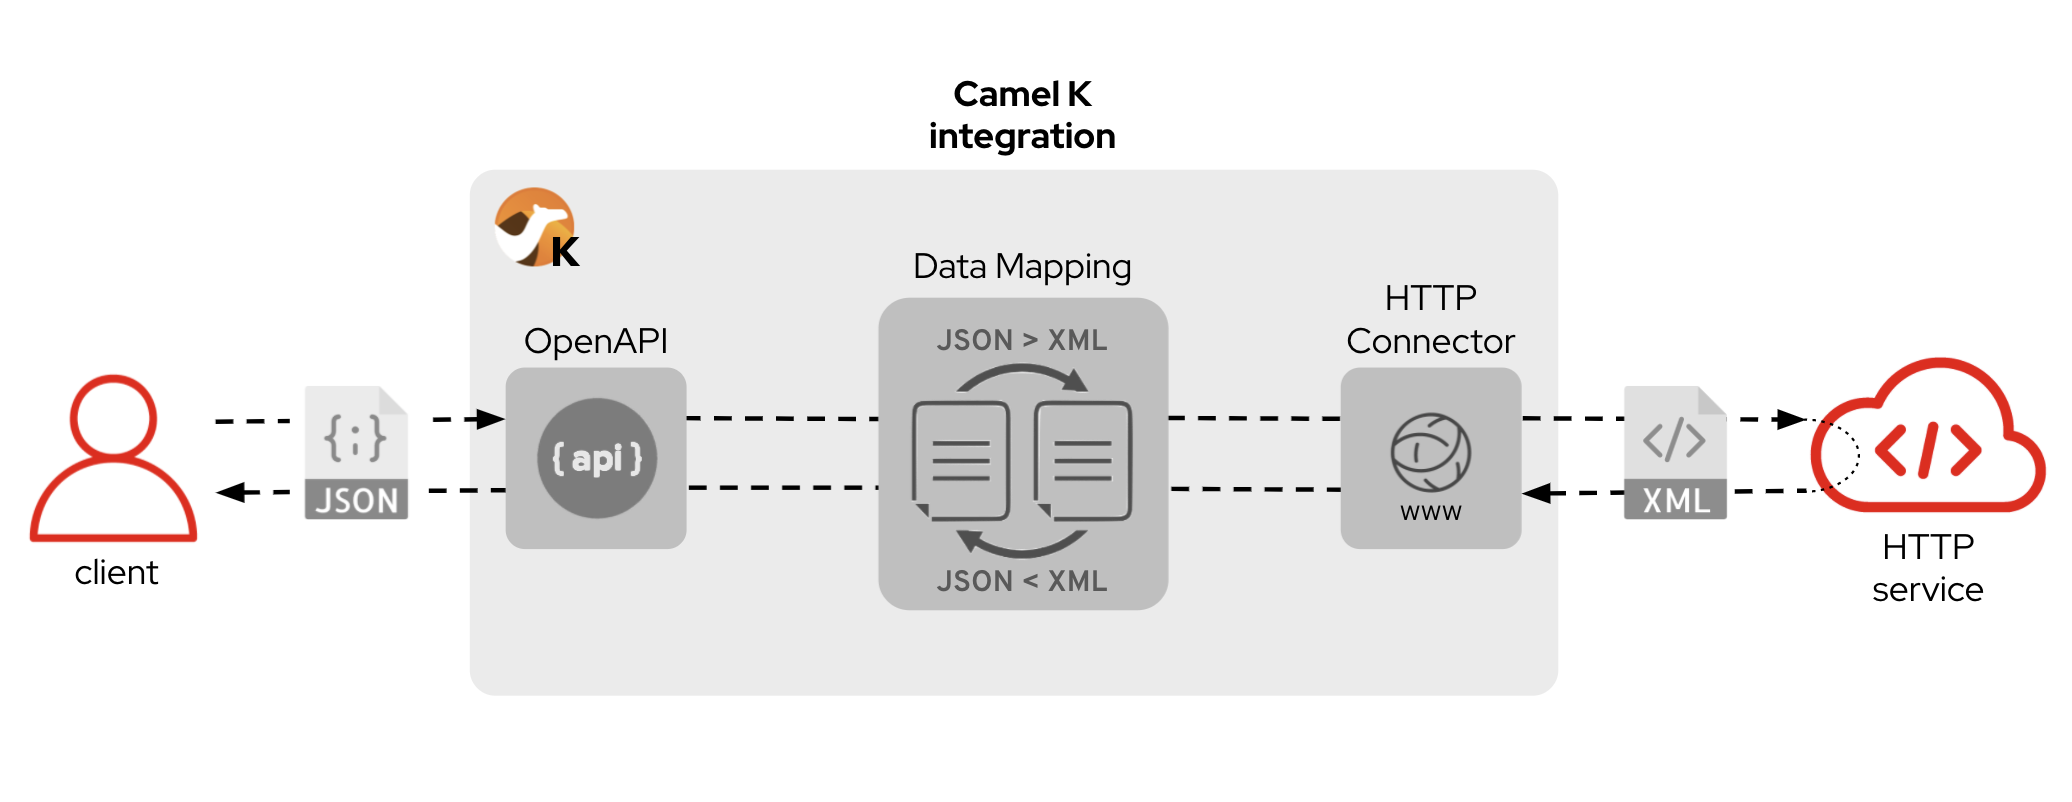 The Camel K flow contains three key stages: (1) API exposure, (2) data transformation, and (3) HTTP connectivity to the backend.